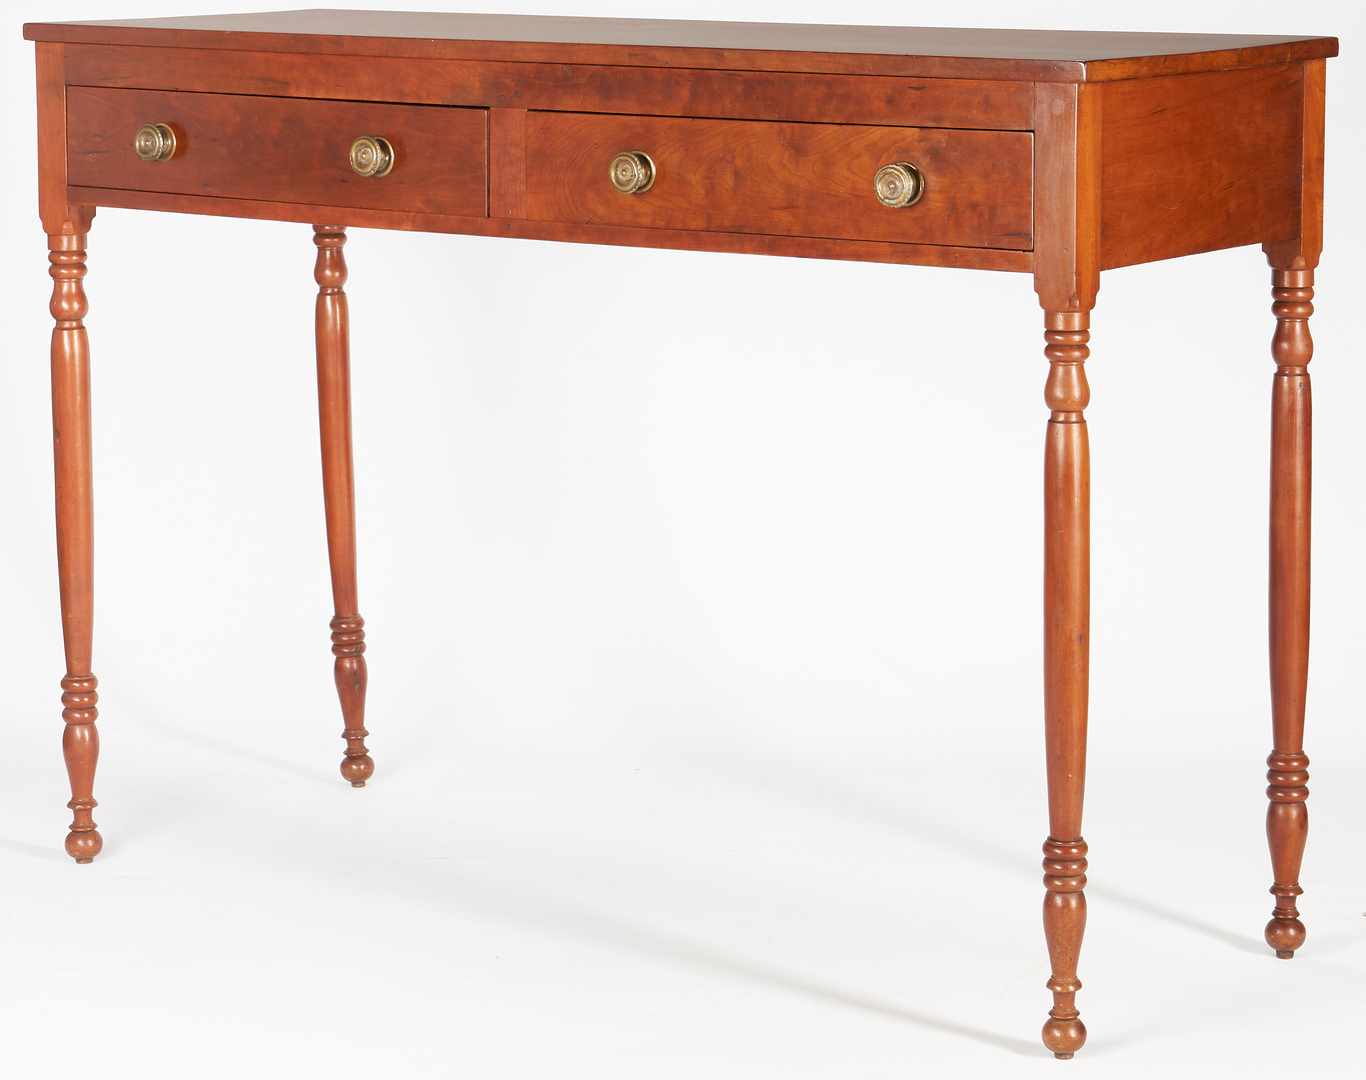 Lot 209: Southern Cherry Huntboard, likely SC